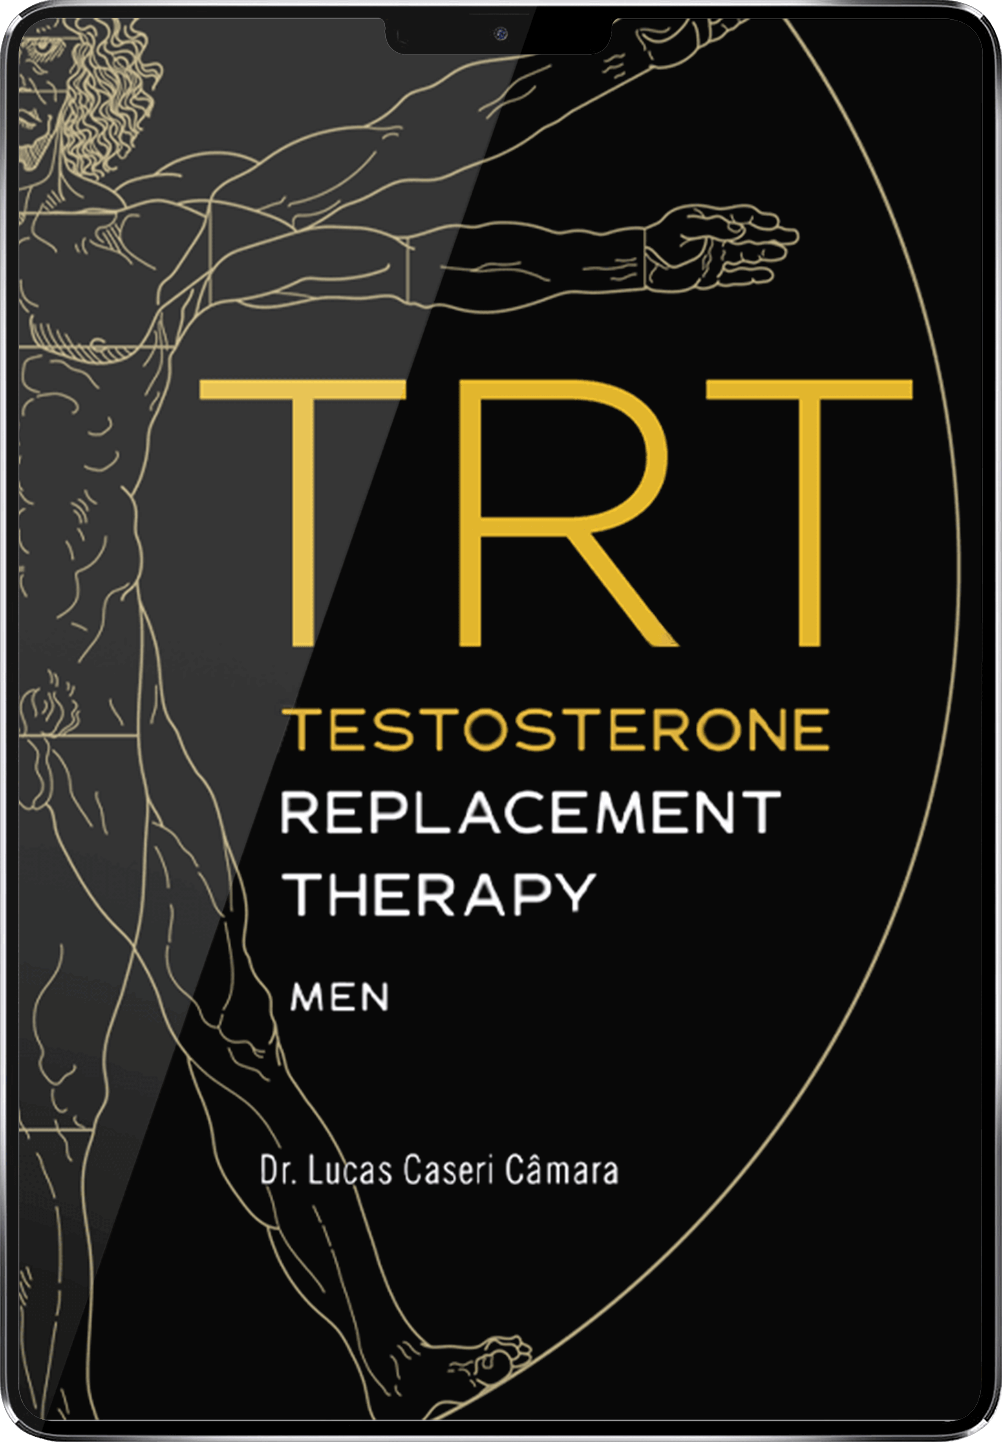 TRT- Testosterone replacement therapy